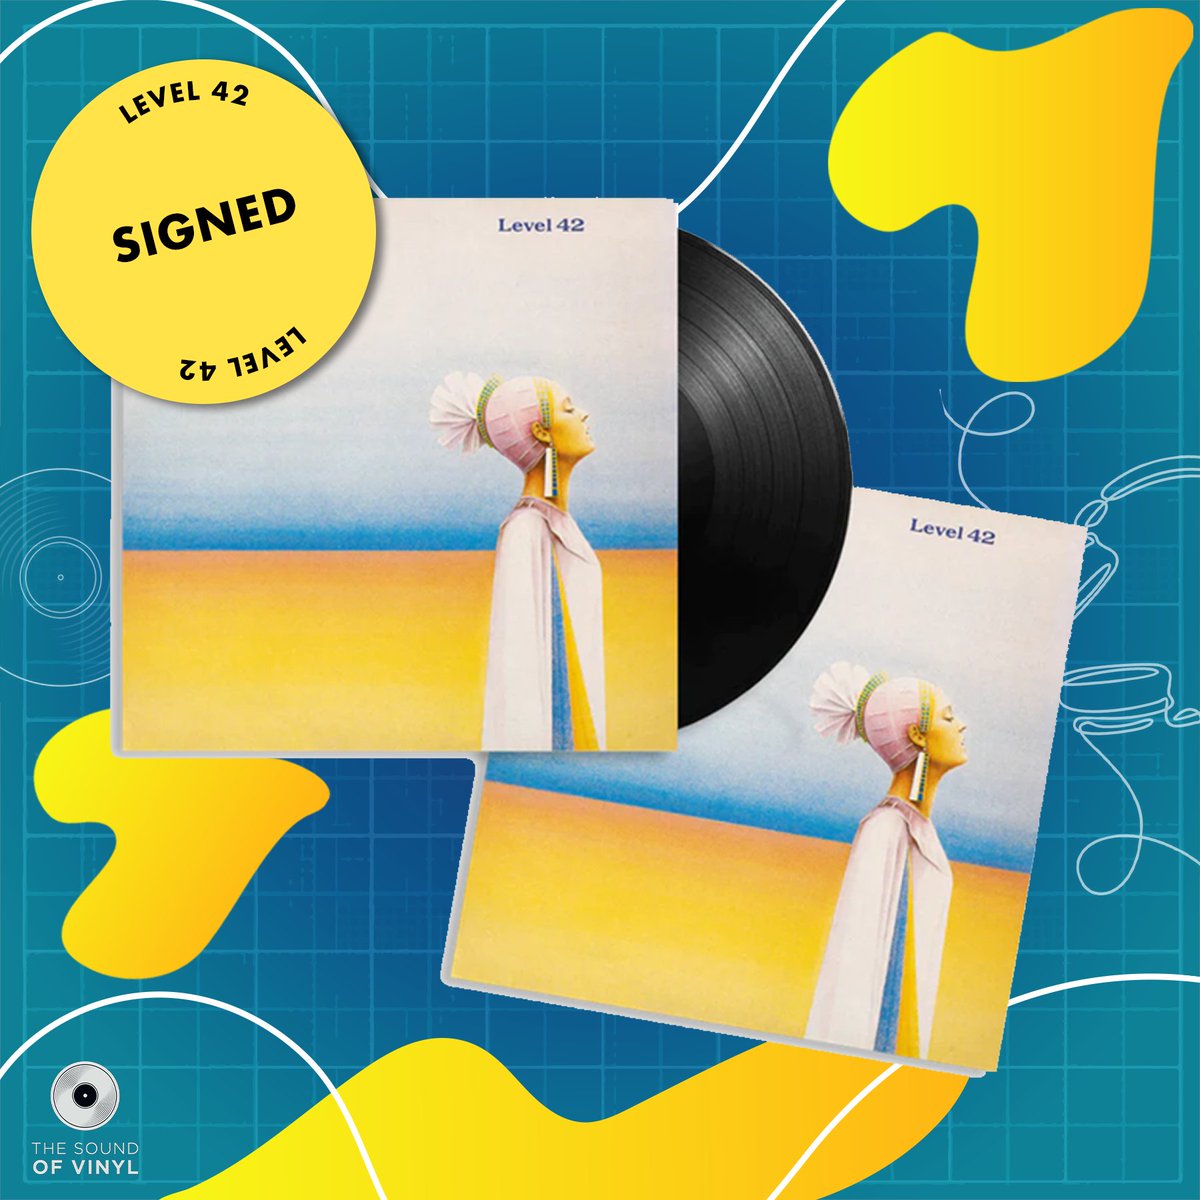 SIGNED! Level 42 - Level 42: Vinyl Reissue + Exclusive Signed Print After many years out of print, Level 42 is finally reissued on vinyl! Now available featuring an exclusive print, signed by Mark King. Strictly limited to 300 copies! Pre-order now >> lnk.to/QLEVw2TP